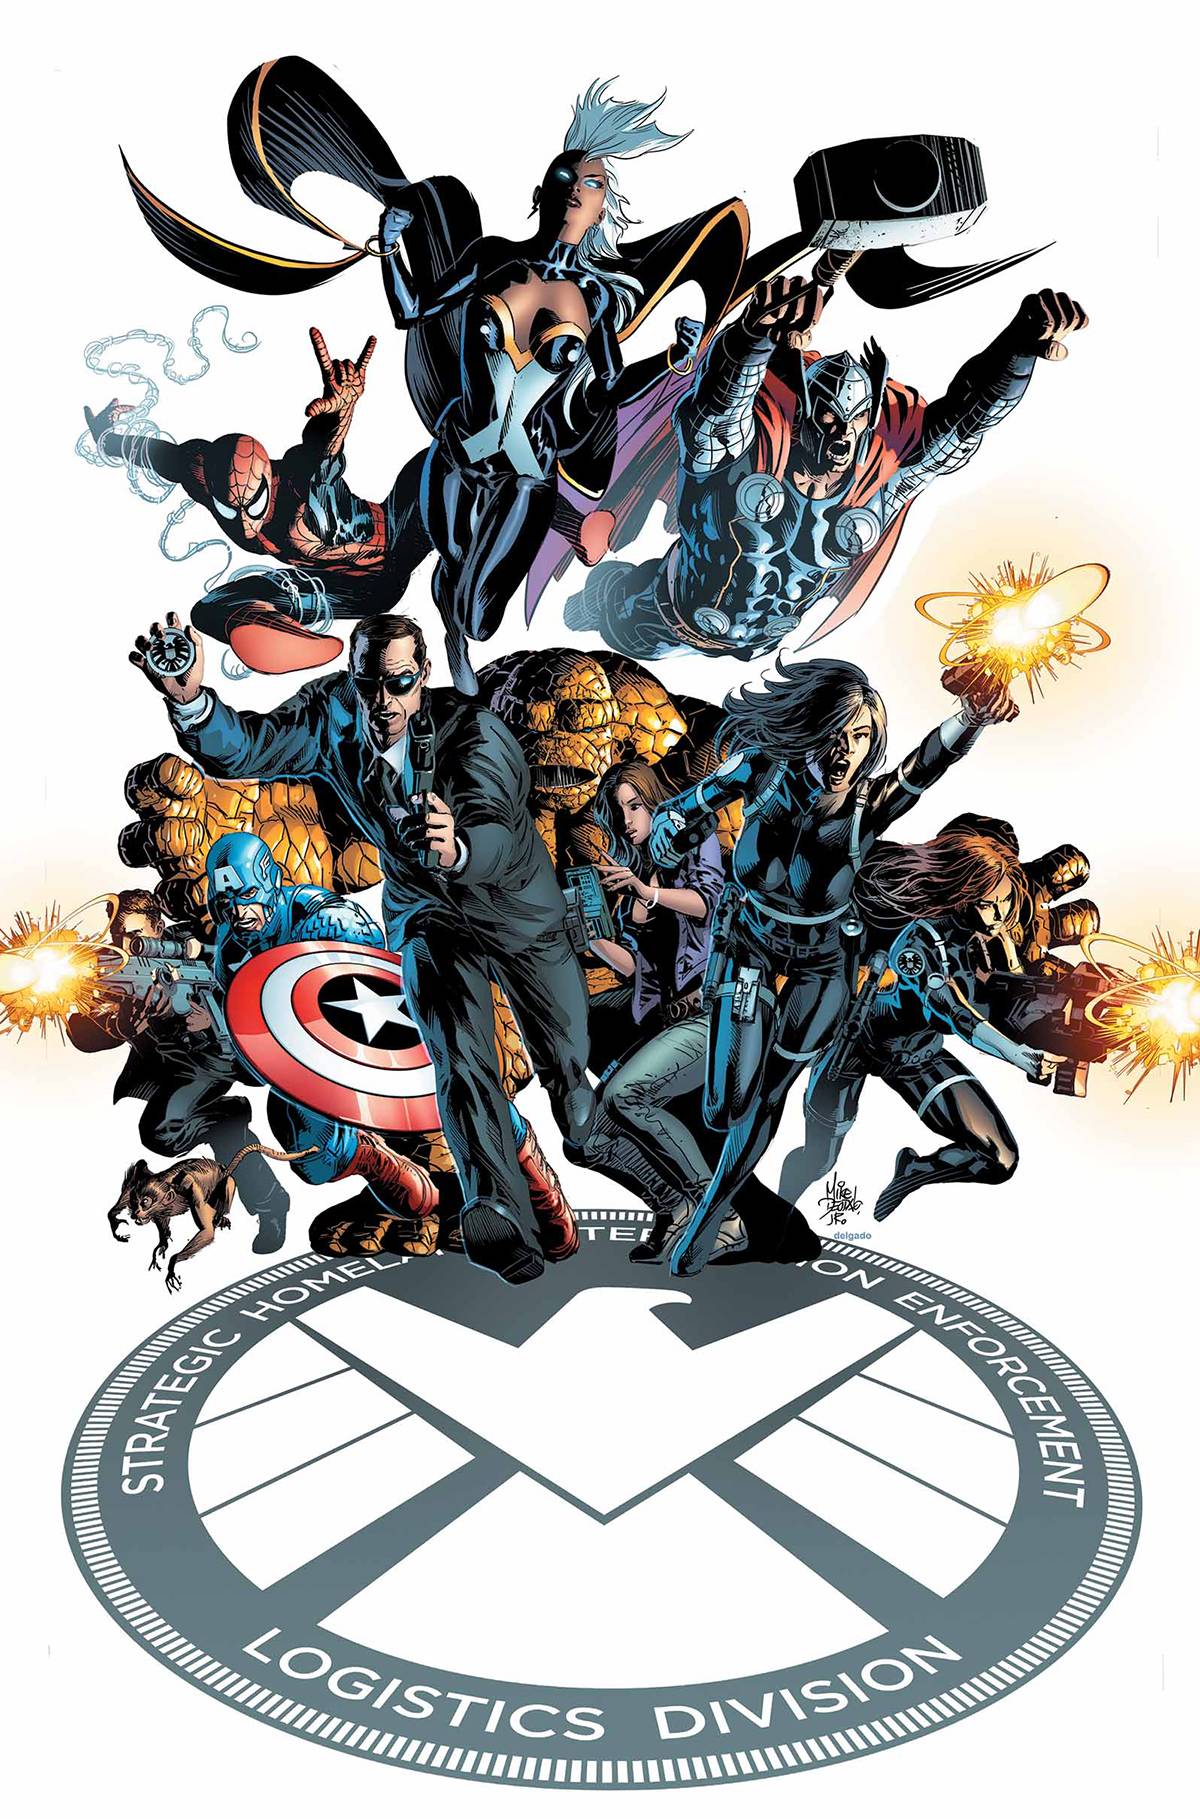 S.H.I.E.L.D. #1 1 for 25 Incentive Mike Deodato (2014)